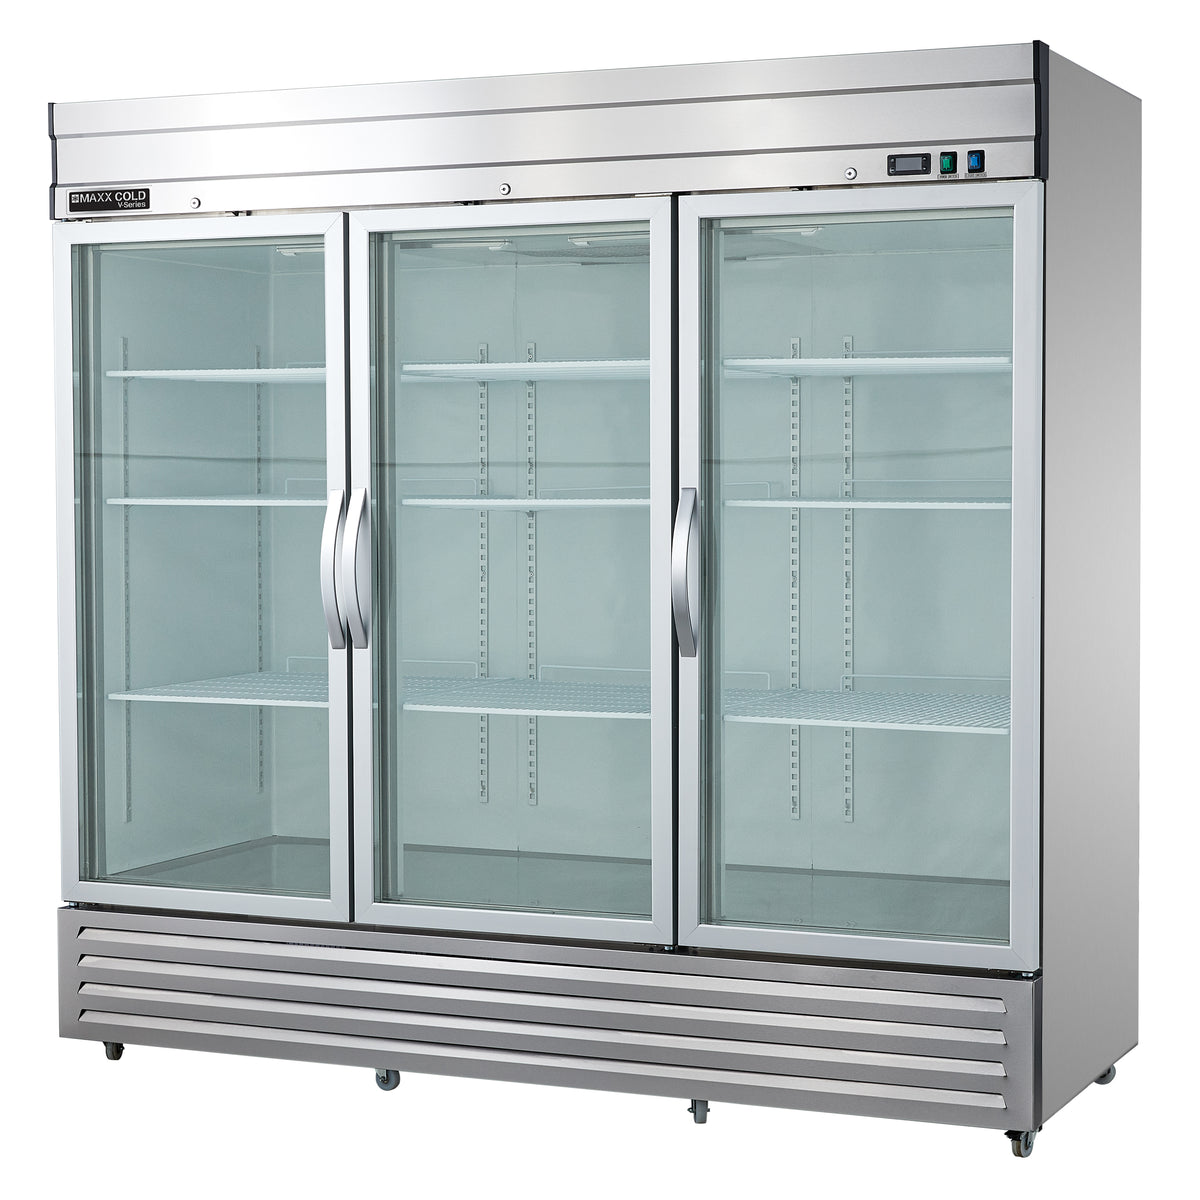 Maxx Cold MVR-72GD V-Series 3 Glass Door Reach-In Refrigerator, Bottom Mount, 81"W, 65 cu. ft. Storage Capacity, in Stainless Steel (MVR-72GDHC)